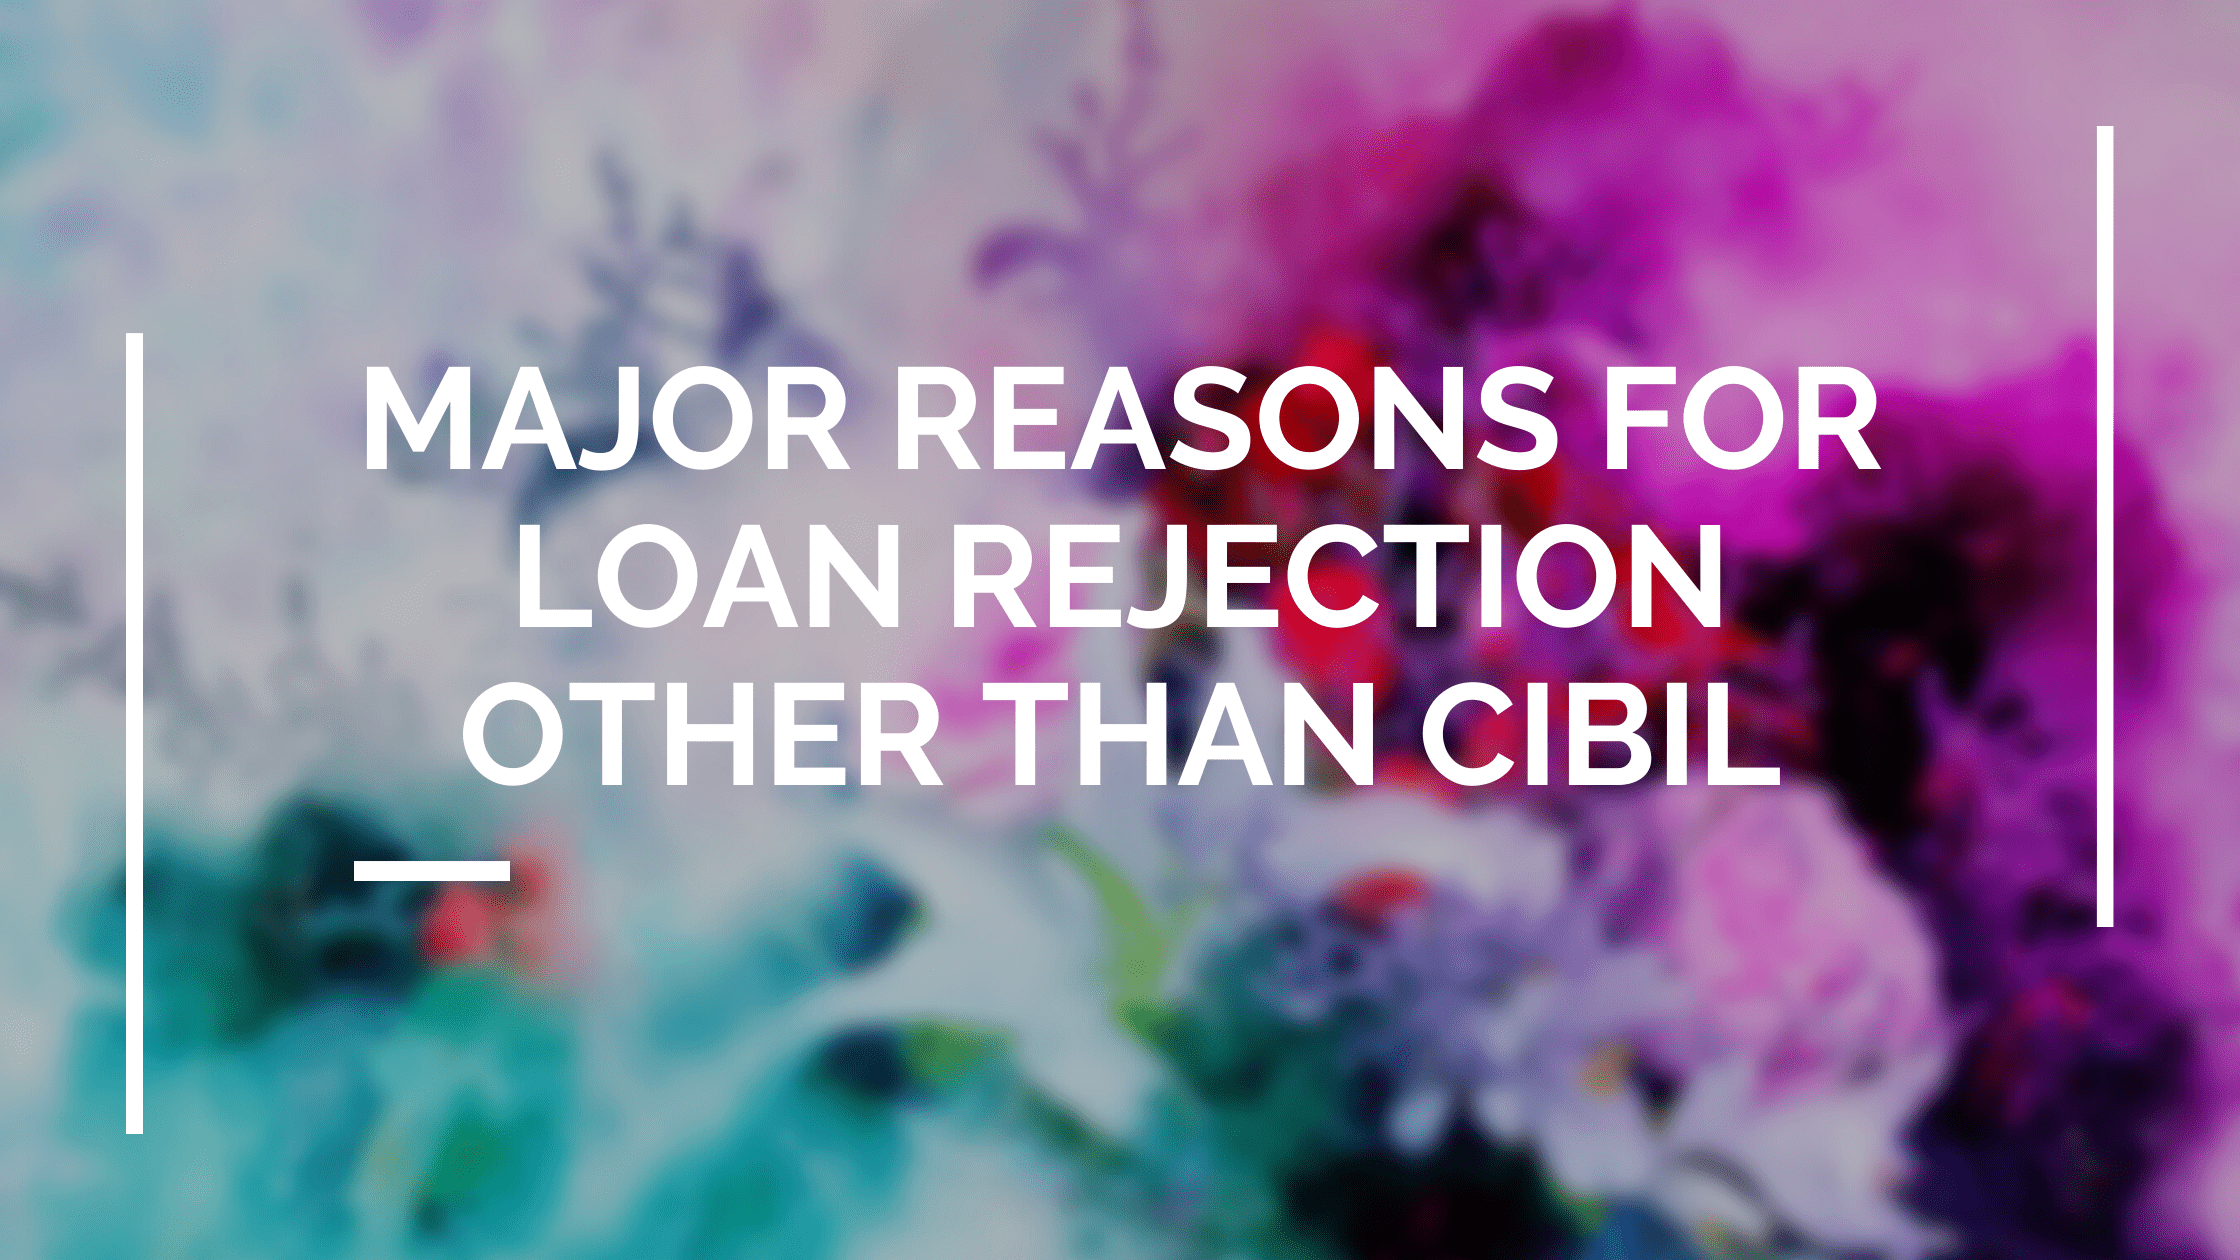 Major Reasons for Loan Rejection Other Than CIBIL